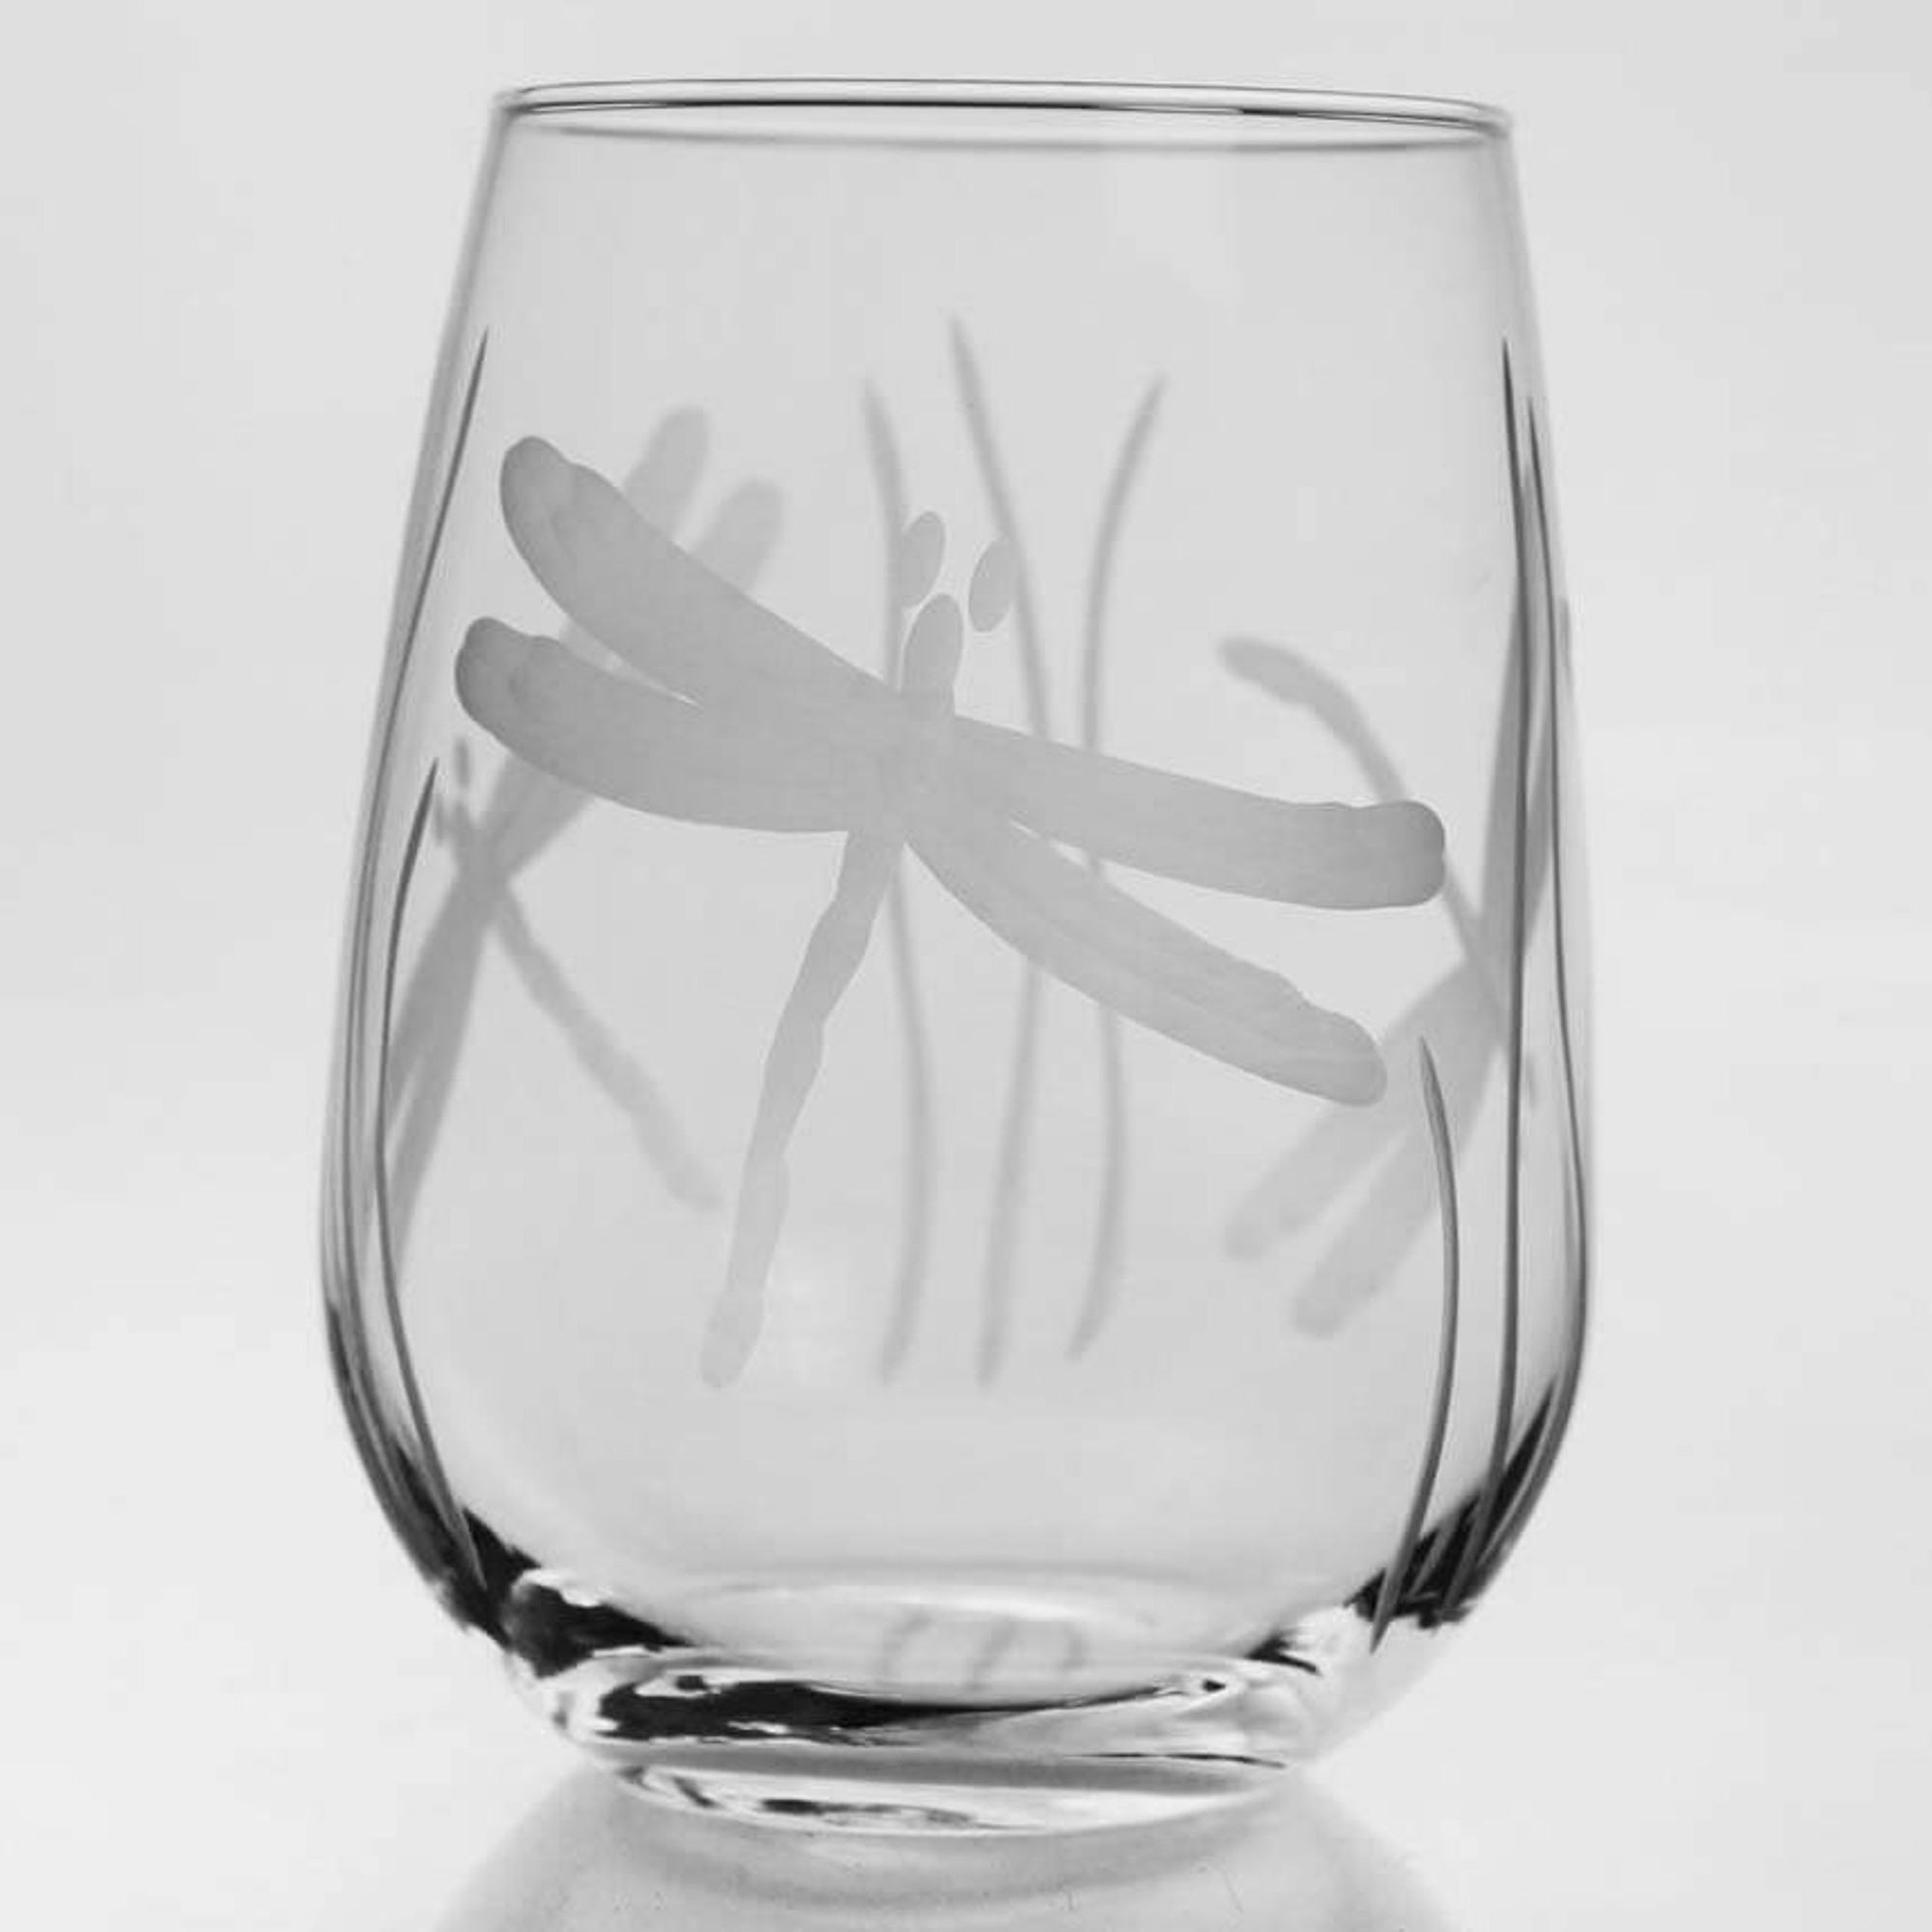 LOT OF 2 DRAGONFLY D2 Etched Stemless Wine Glass 21oz ADD NAMES FOR FREE 